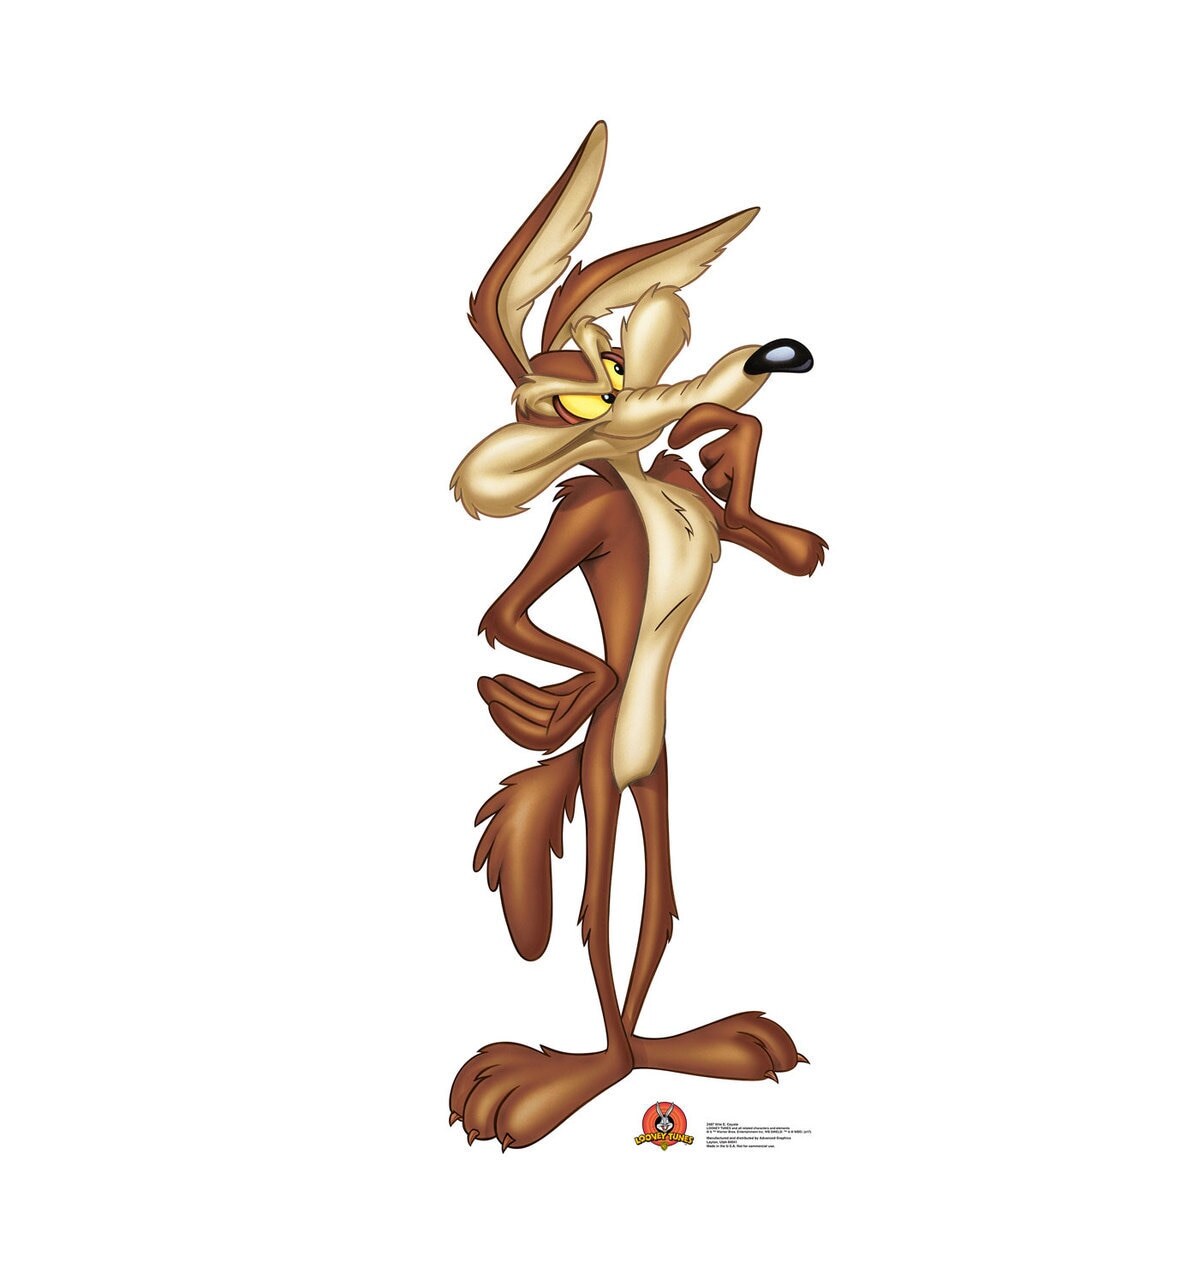 Wile E. Coyote (Looney Tunes) | Michaels